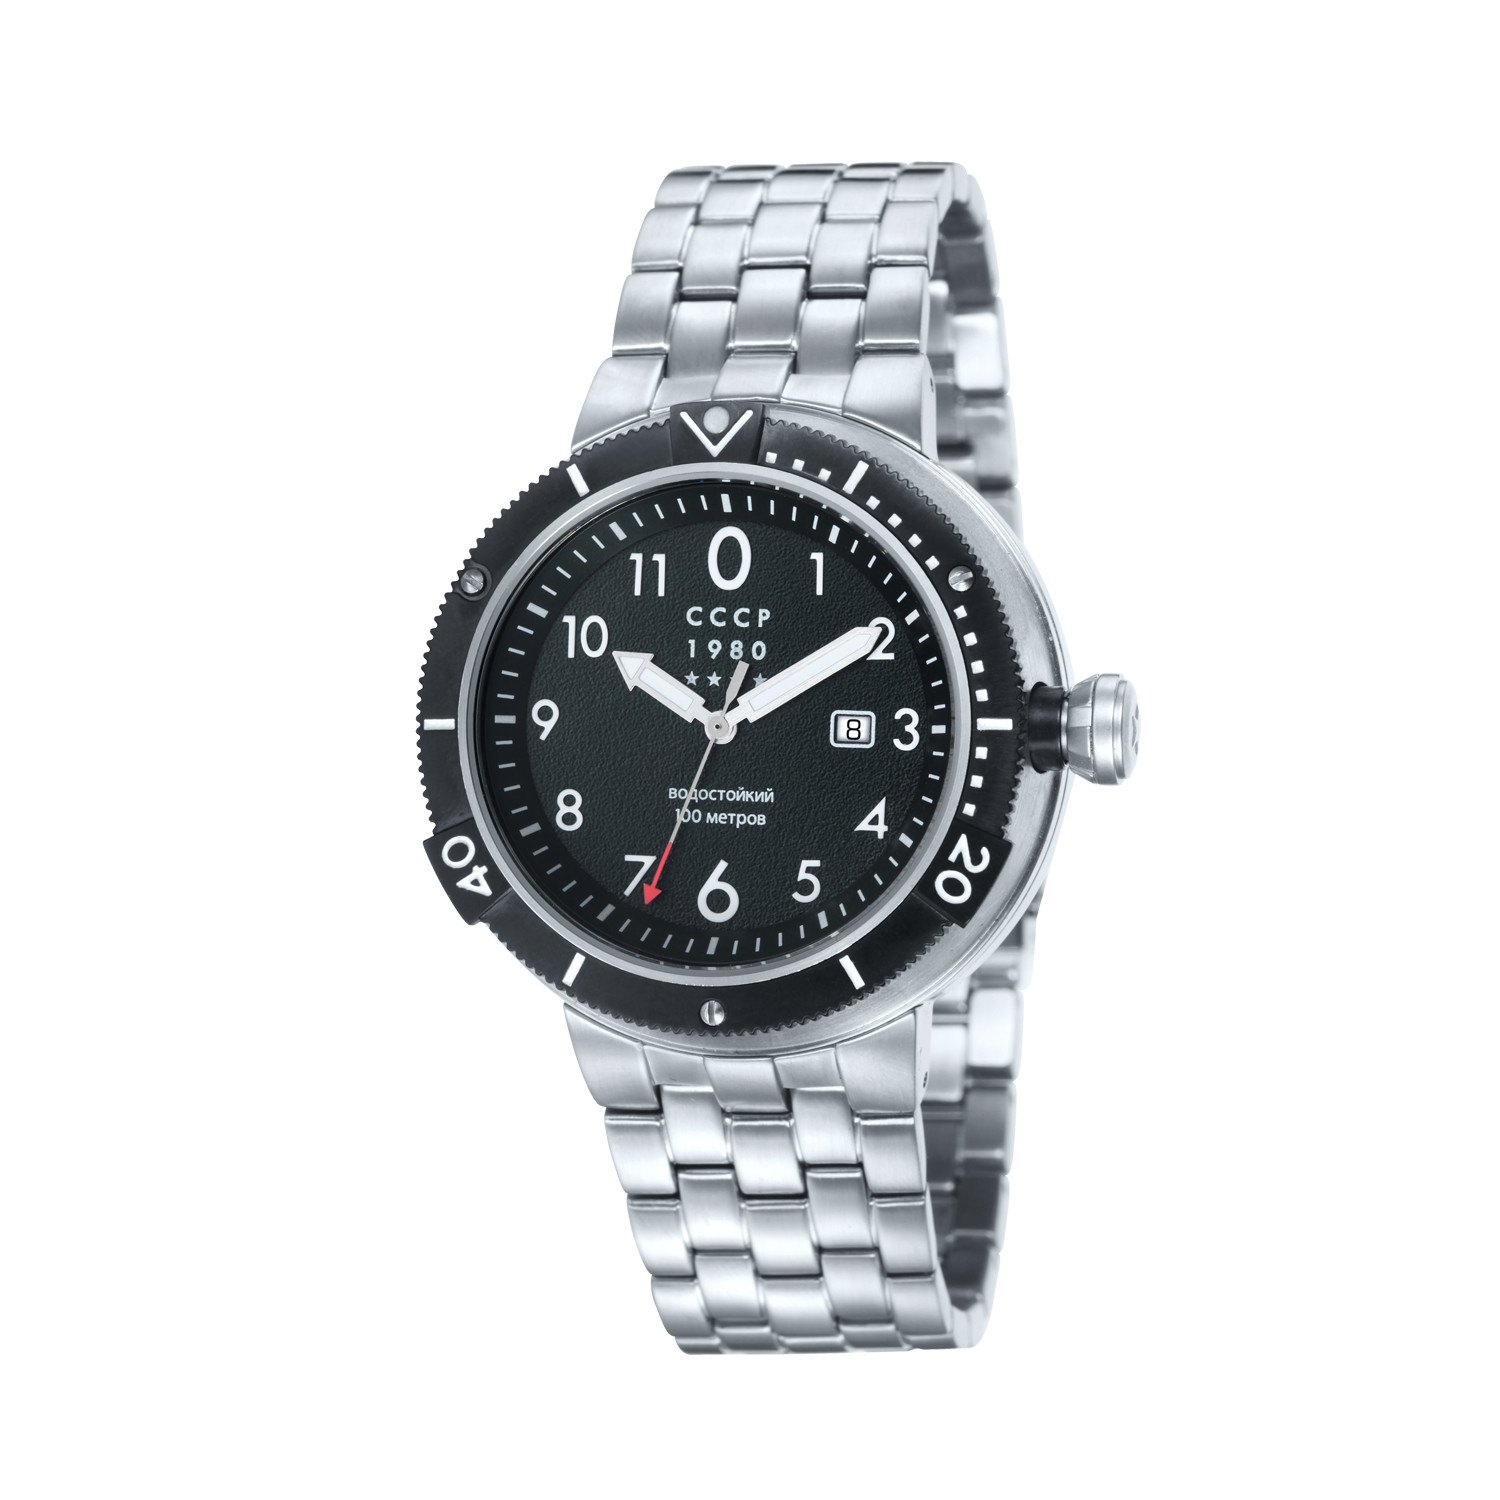 CCCP Kashalot Submarine Automatic // CP-7004-11 - CCCP Watches - Touch ...